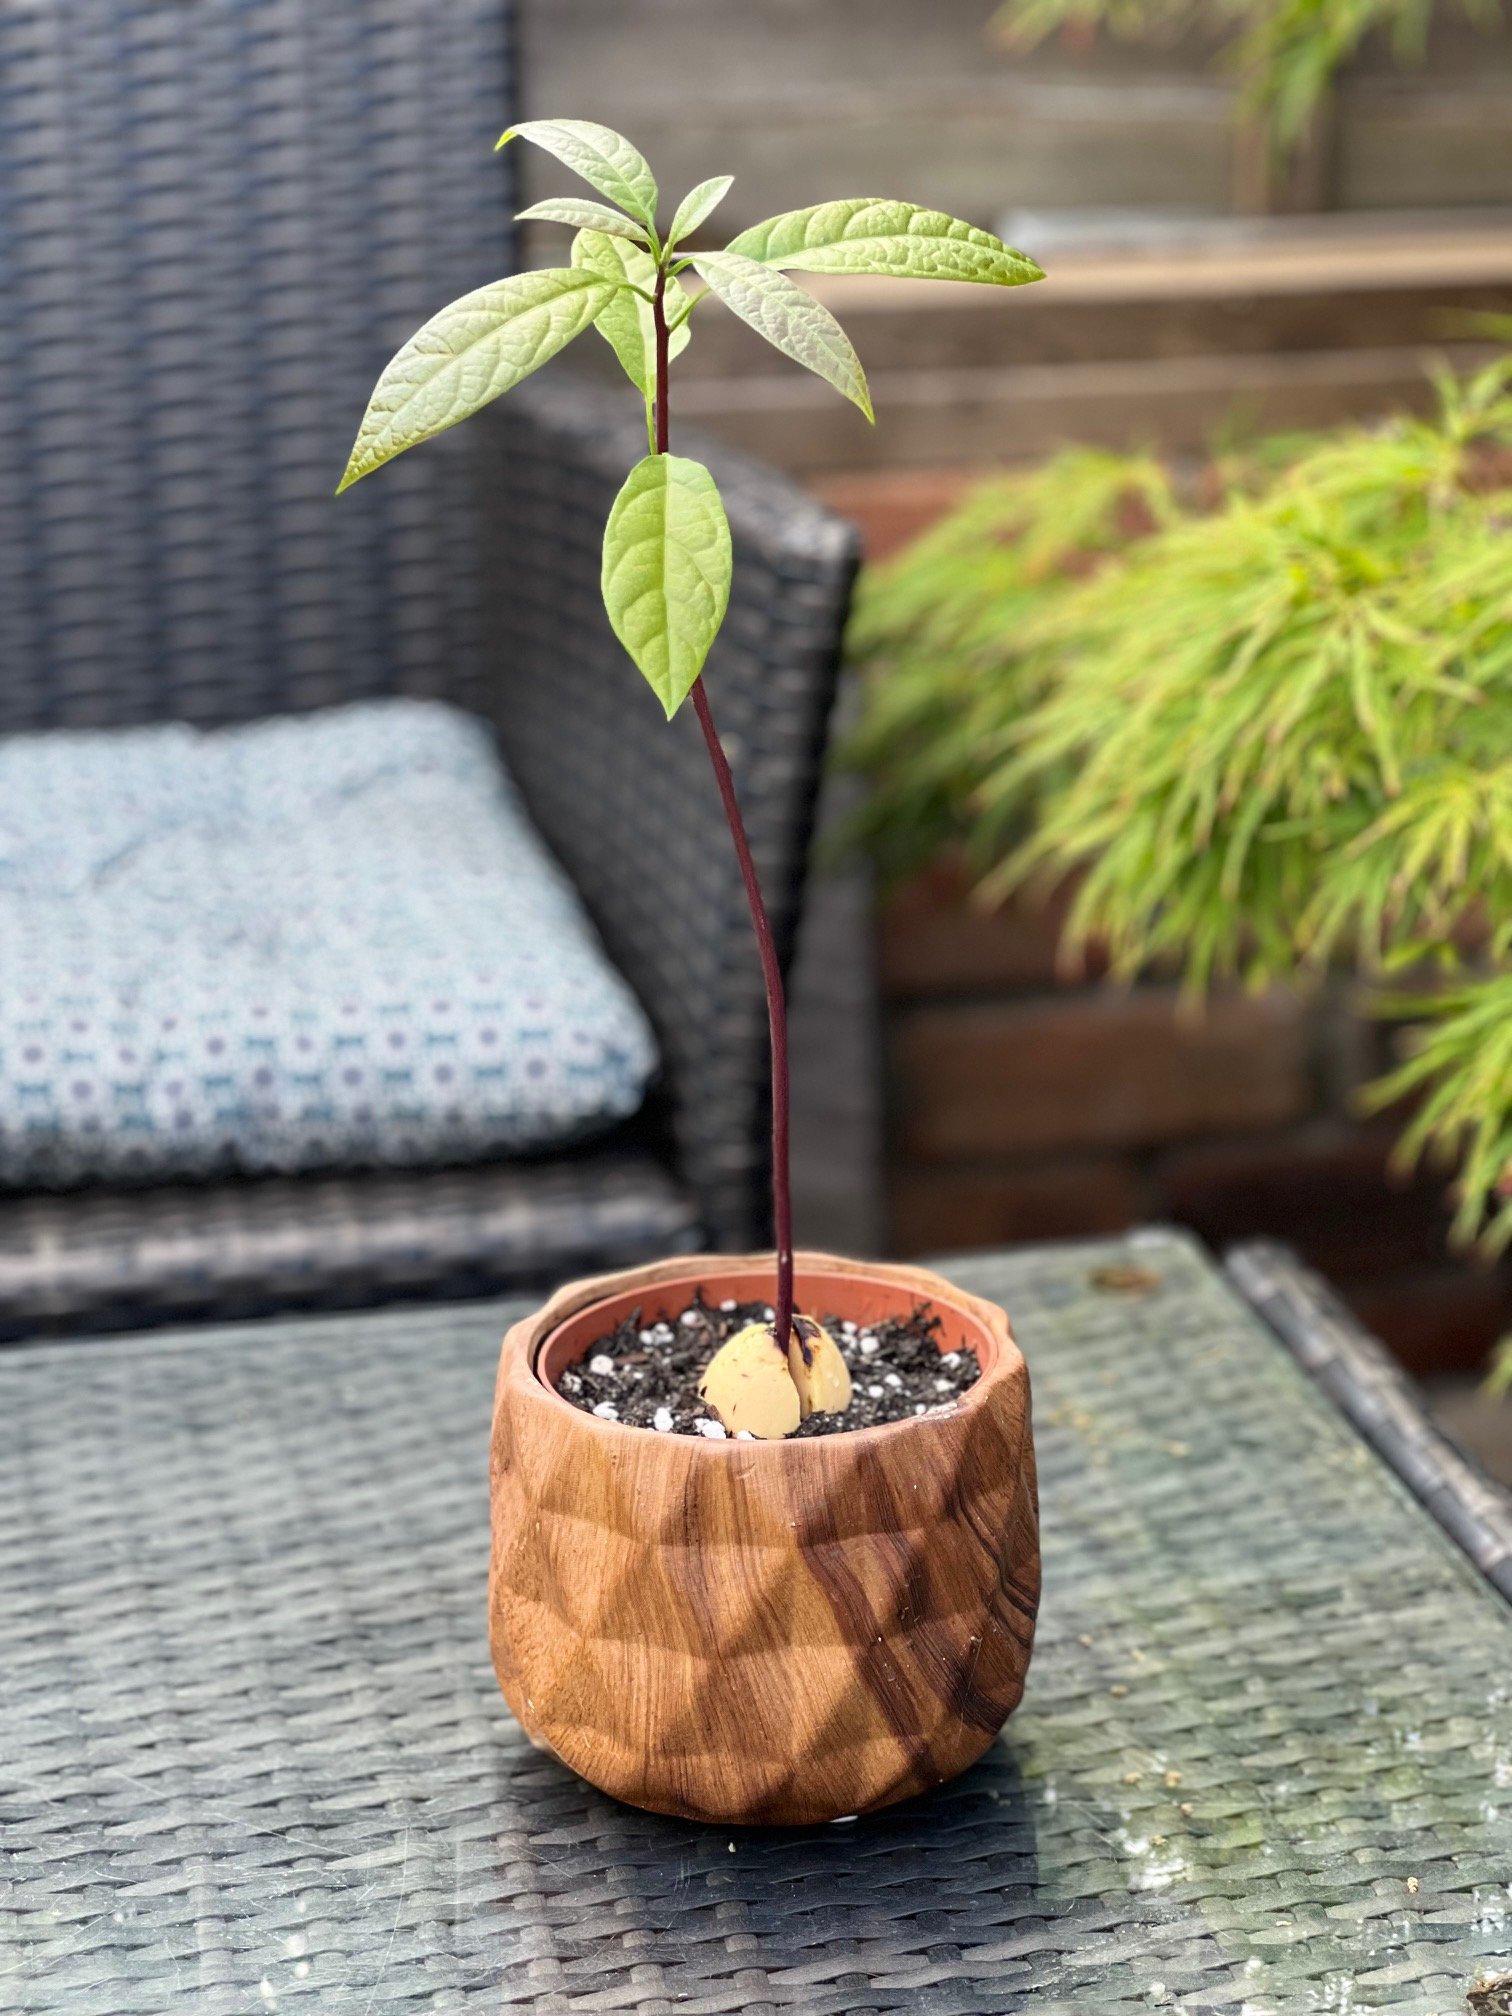 How to Grow an Avocado from Seeds and Reap the Delicious缩略图